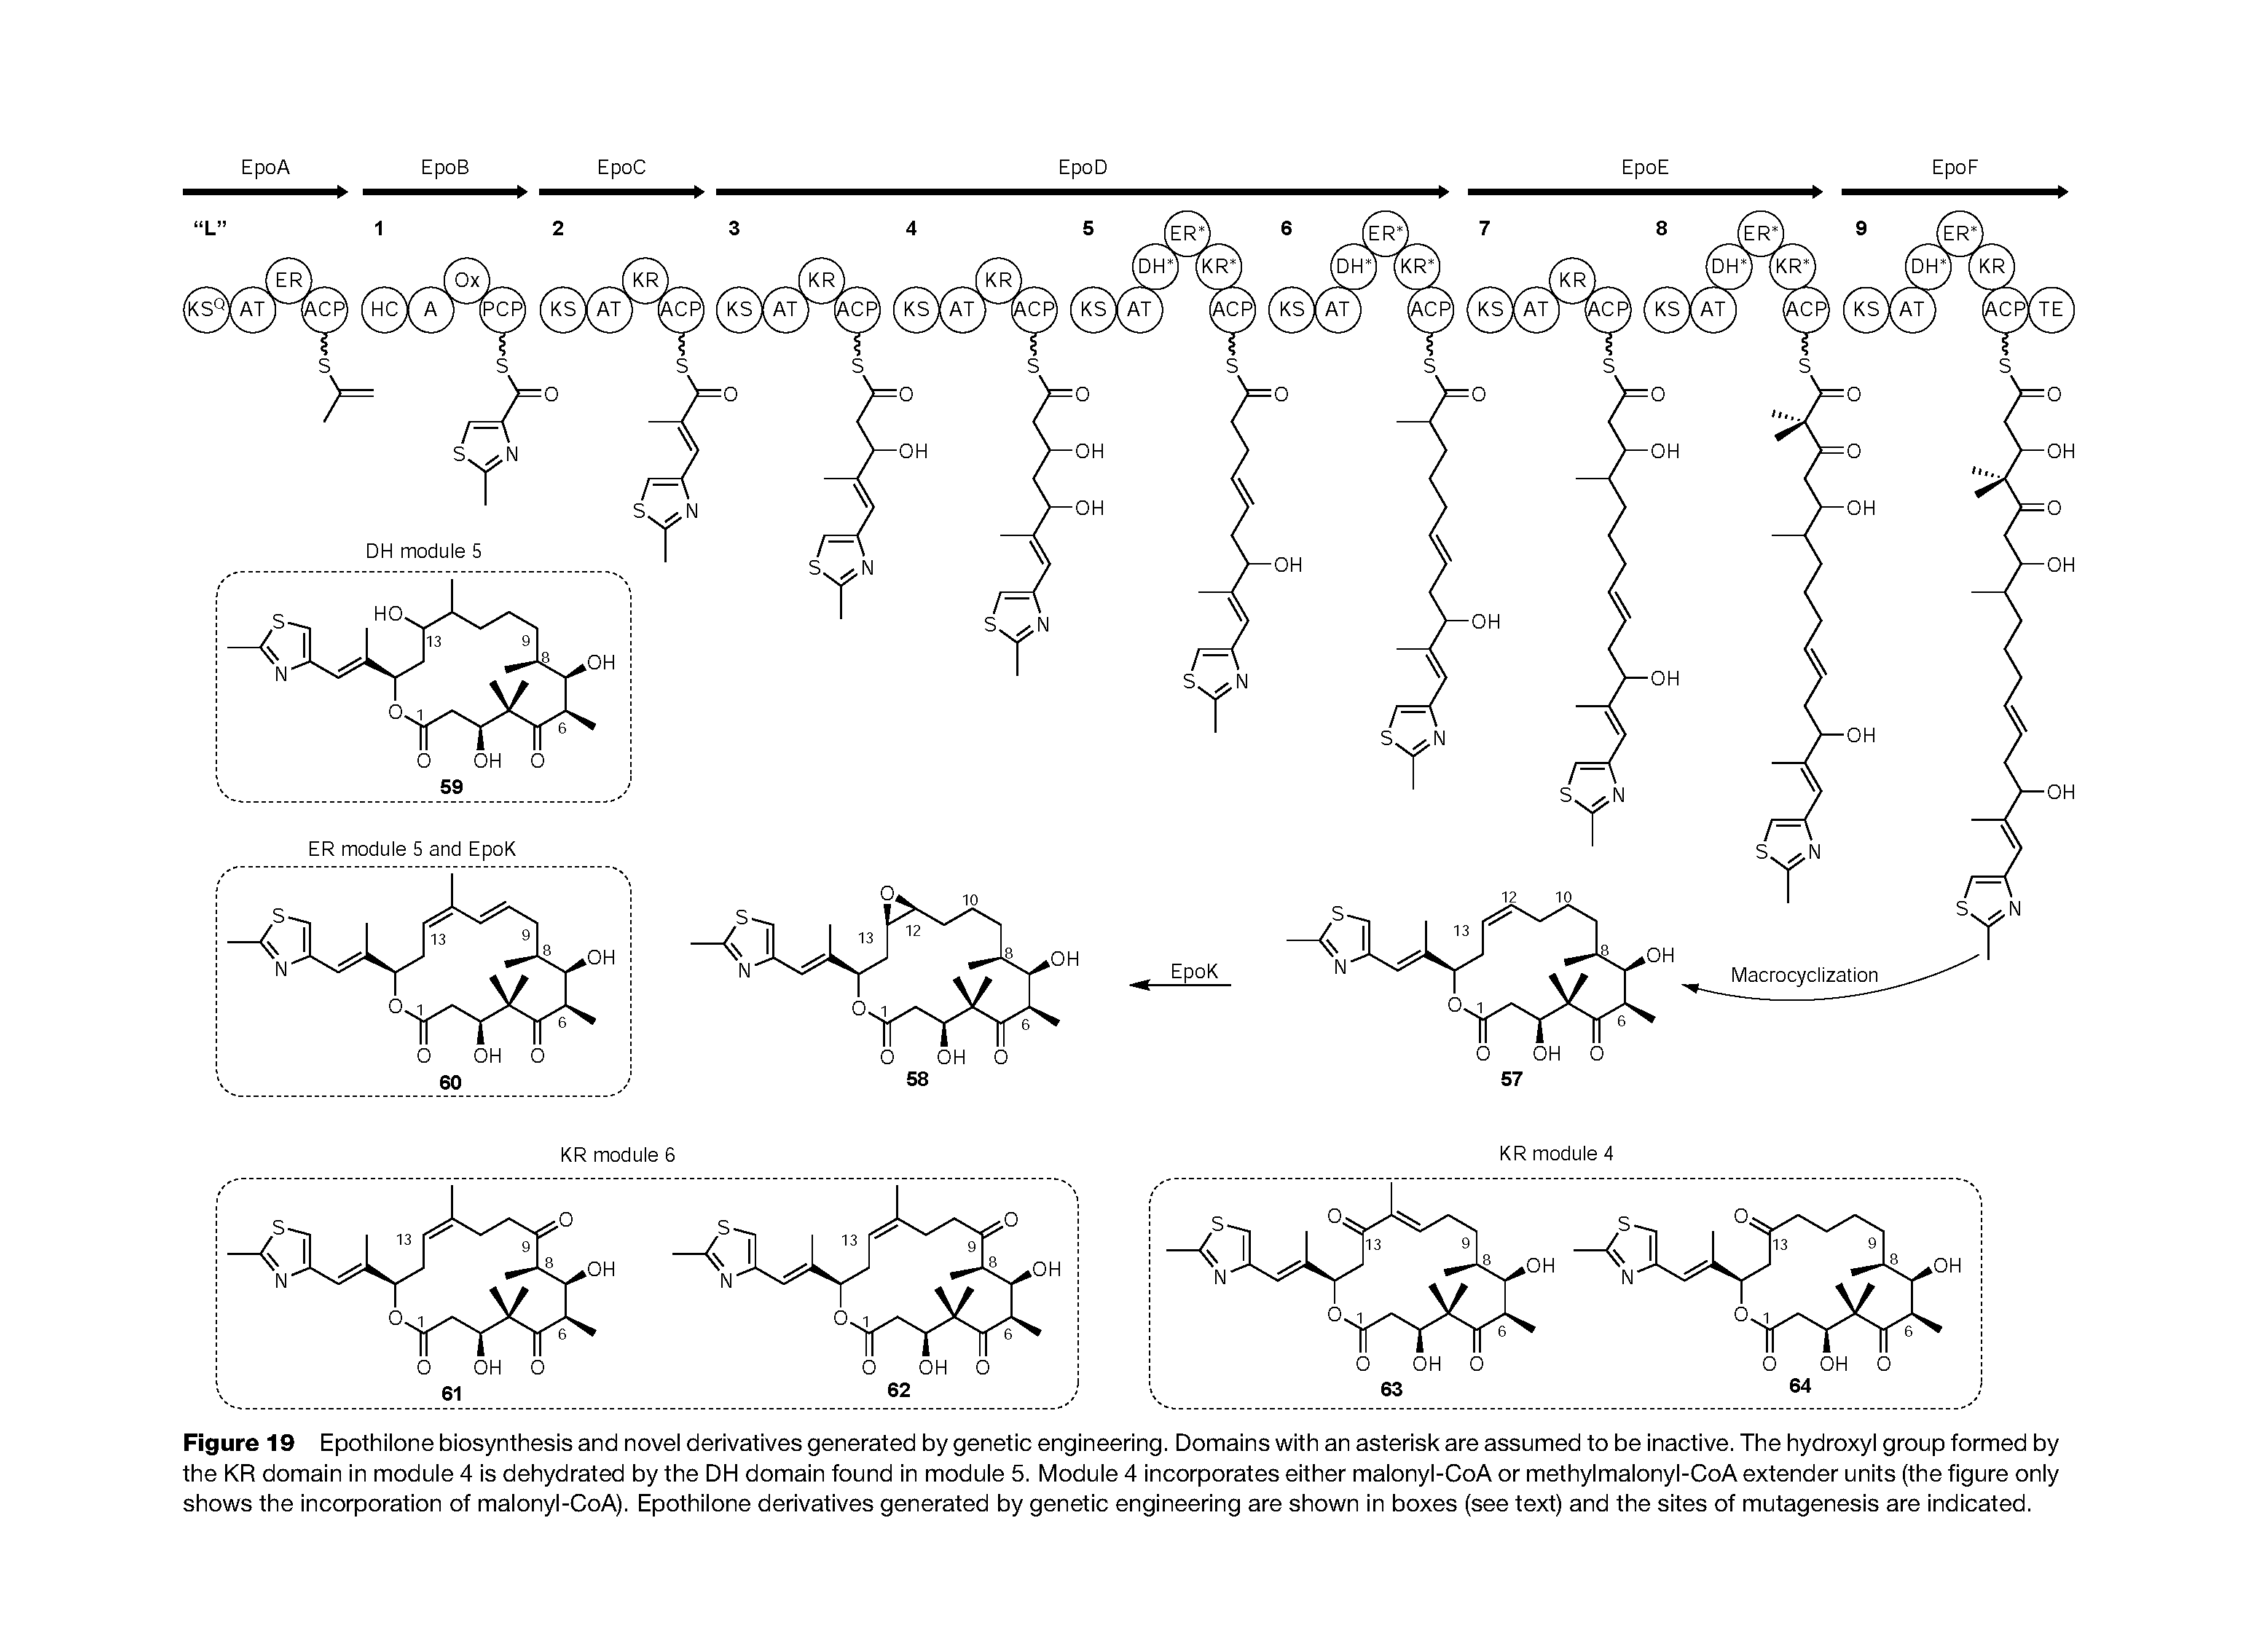 Figure 19 Epothilone biosynthesis and novel derivatives generated by genetic engineering. Domains with an asterisk are assumed to be inactive. The hydroxyl group formed by the KR domain in module 4 is dehydrated by the DH domain found in module 5. Module 4 incorporates either malonyl-CoA or methylmalonyl-CoA extender units (the figure only shows the incorporation of malonyl-CoA). Epothilone derivatives generated by genetic engineering are shown in boxes (see text) and the sites of mutagenesis are indicated.